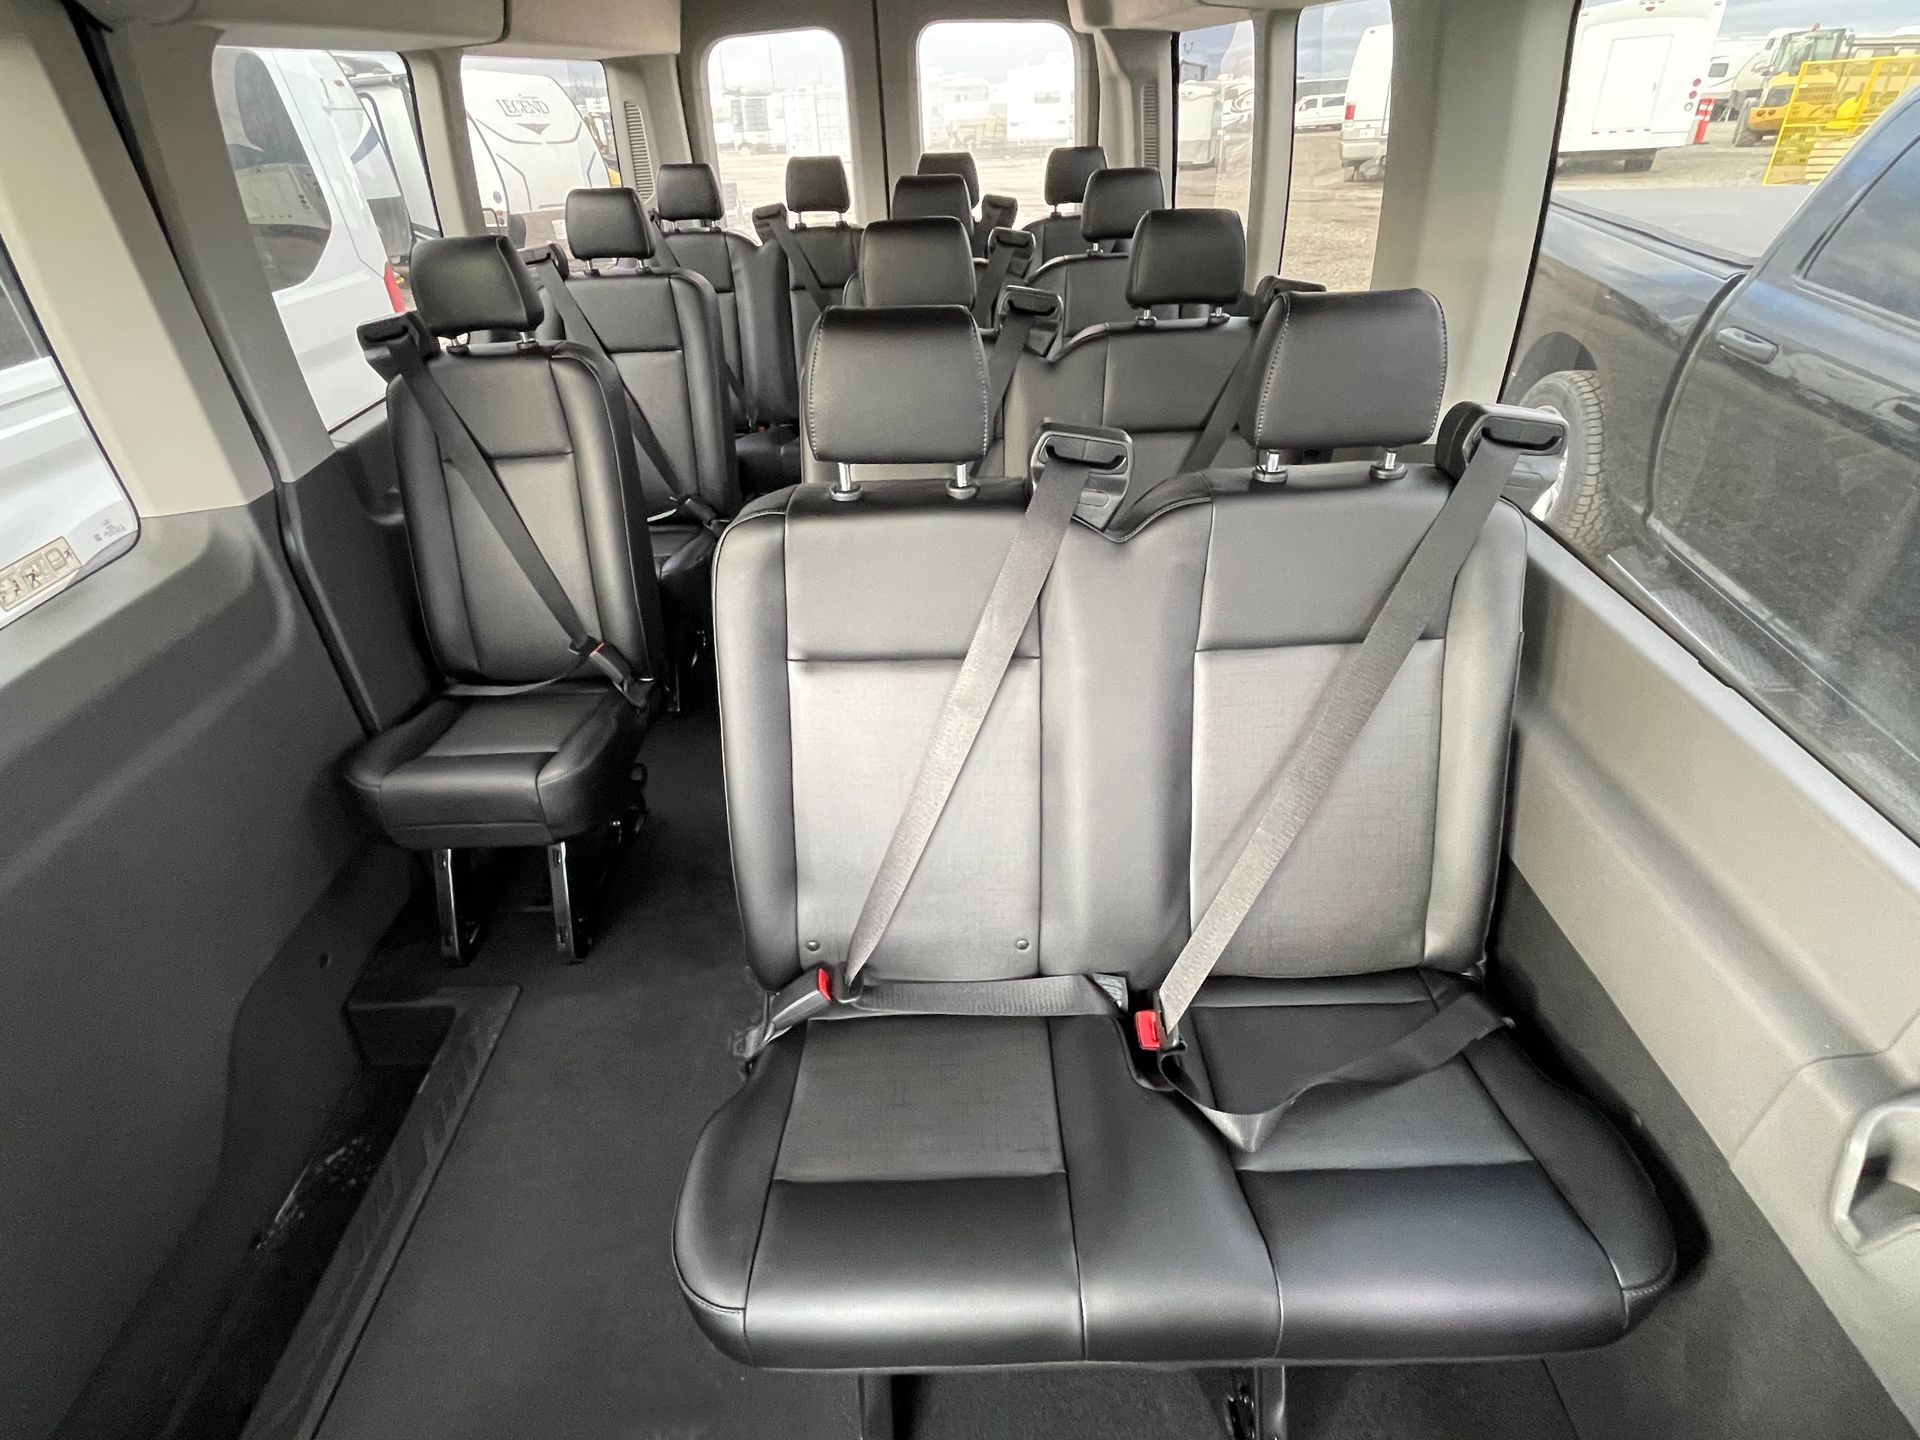 Limo To Go Transit executive 13 passenger shuttle bus interior seating